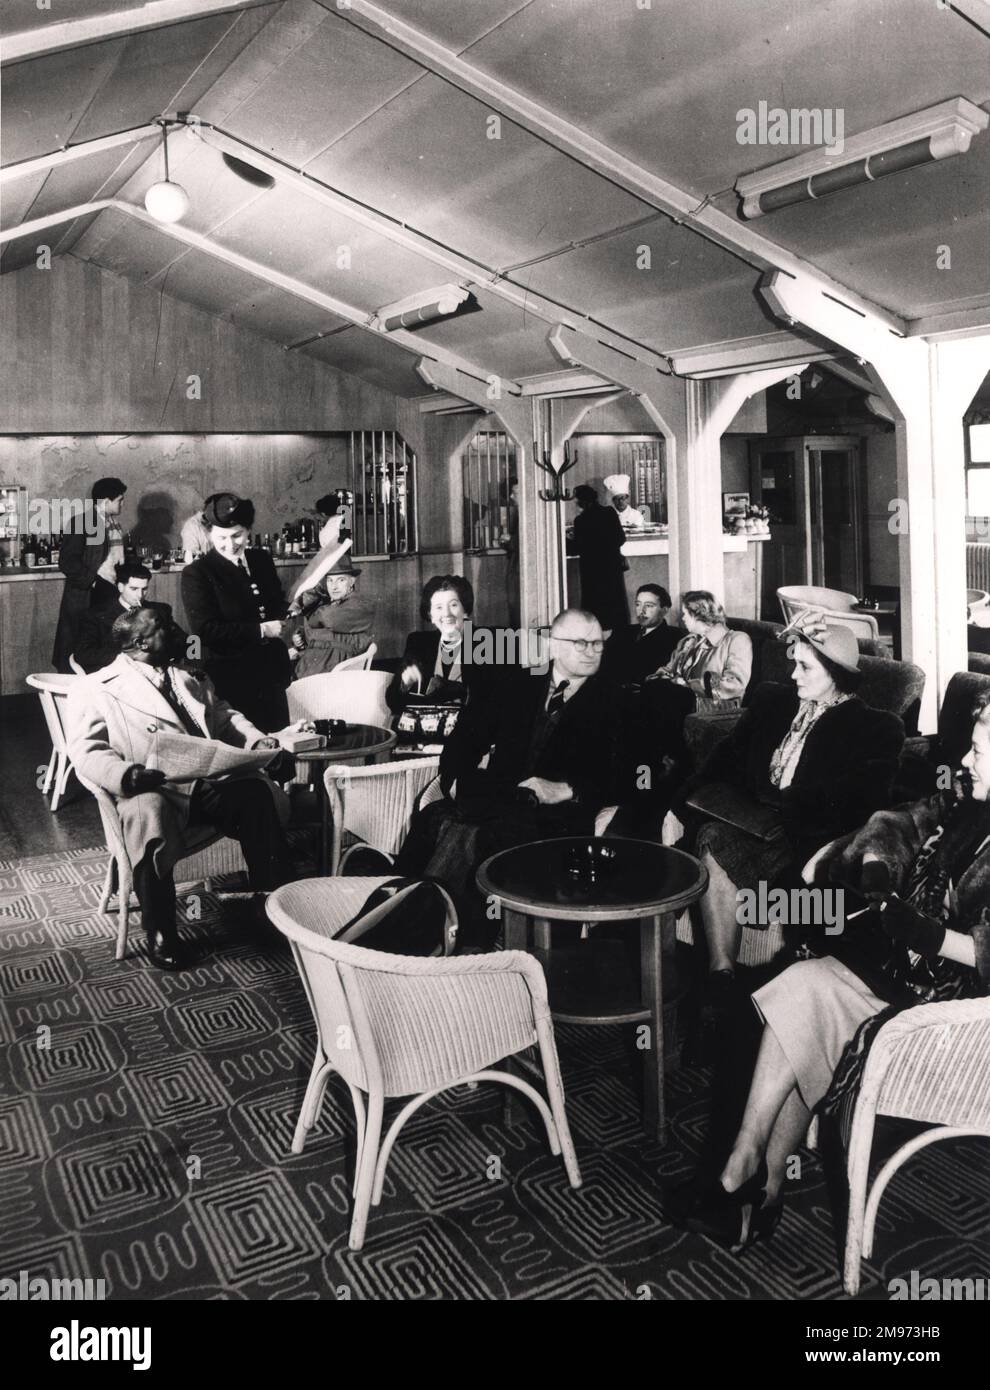 The Departure Lounge at Heathrow Airport, circa 1951. Stock Photo